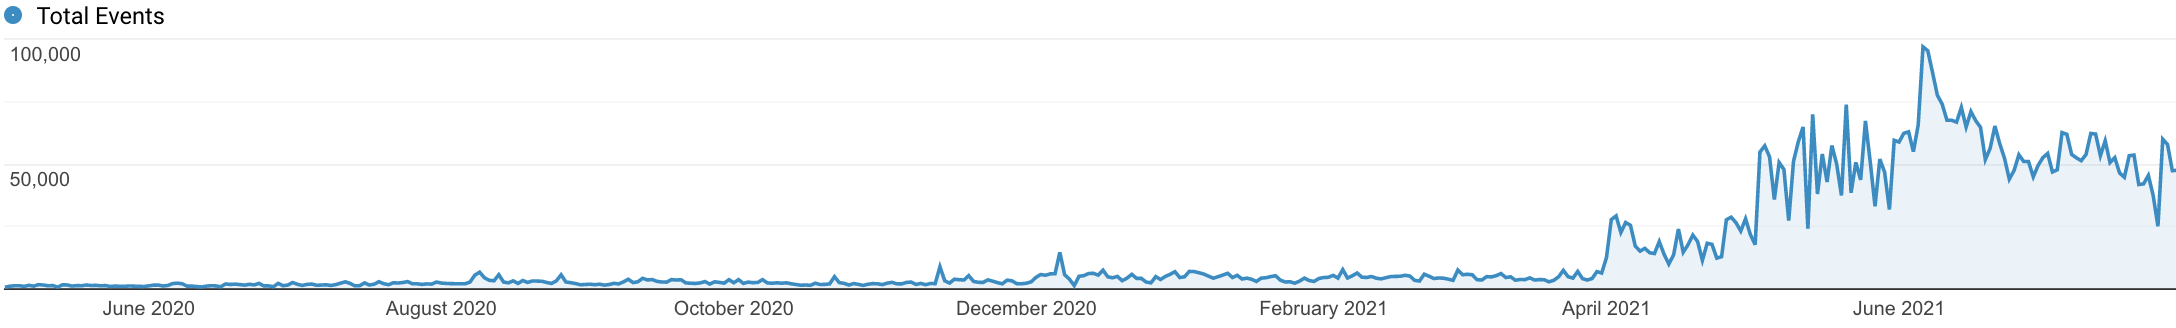 User activity on Microsite increased once we moved to Next.js